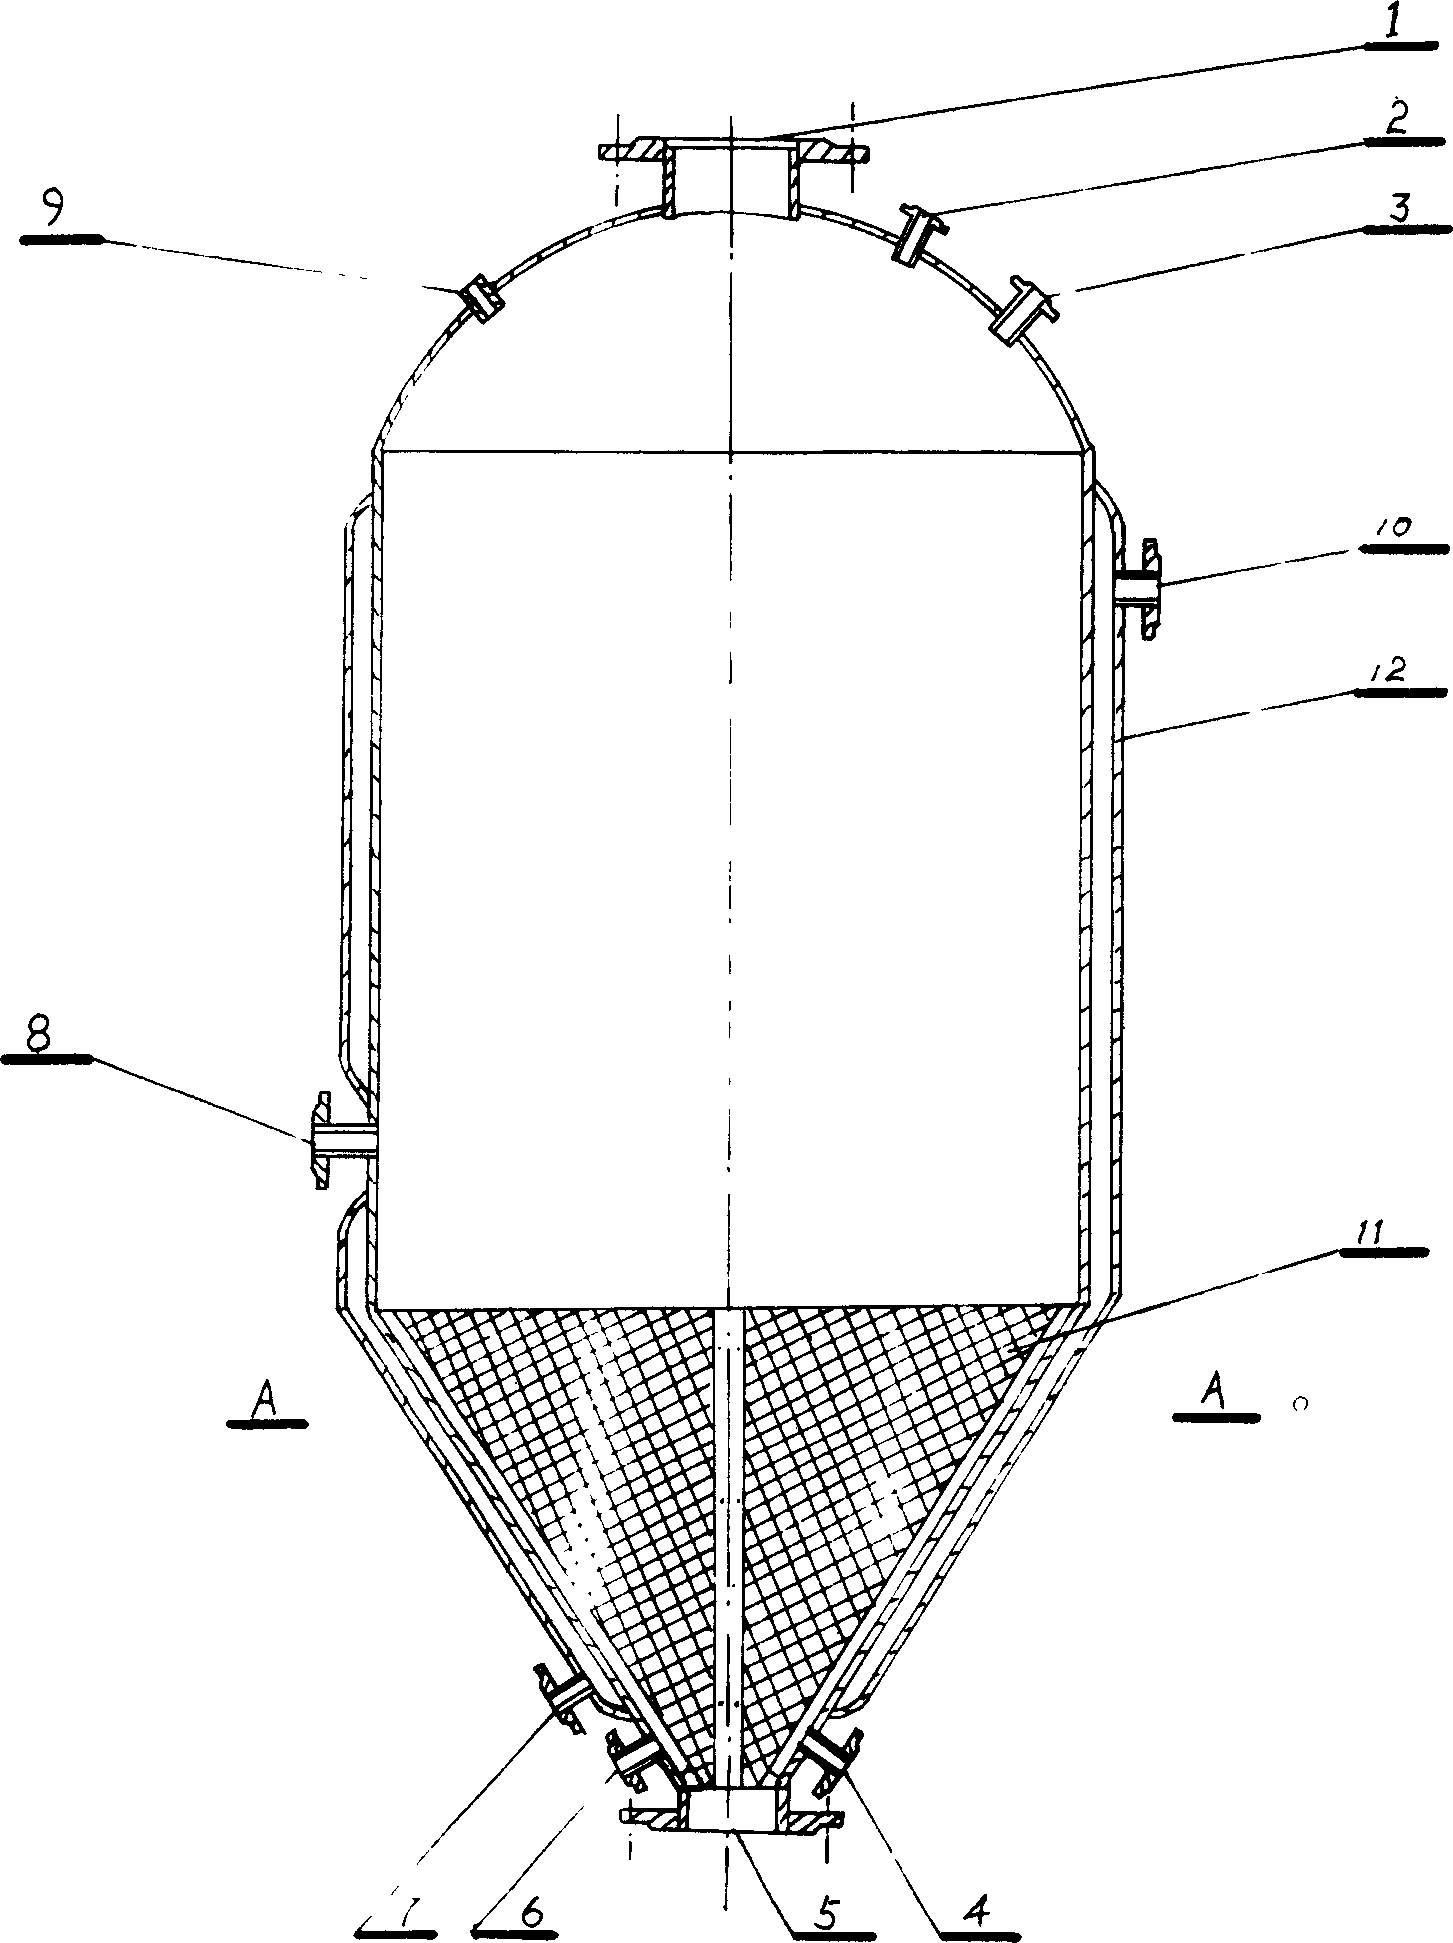 Pulping method of non-wood fibers with no black liquor drained off as well as its boiler